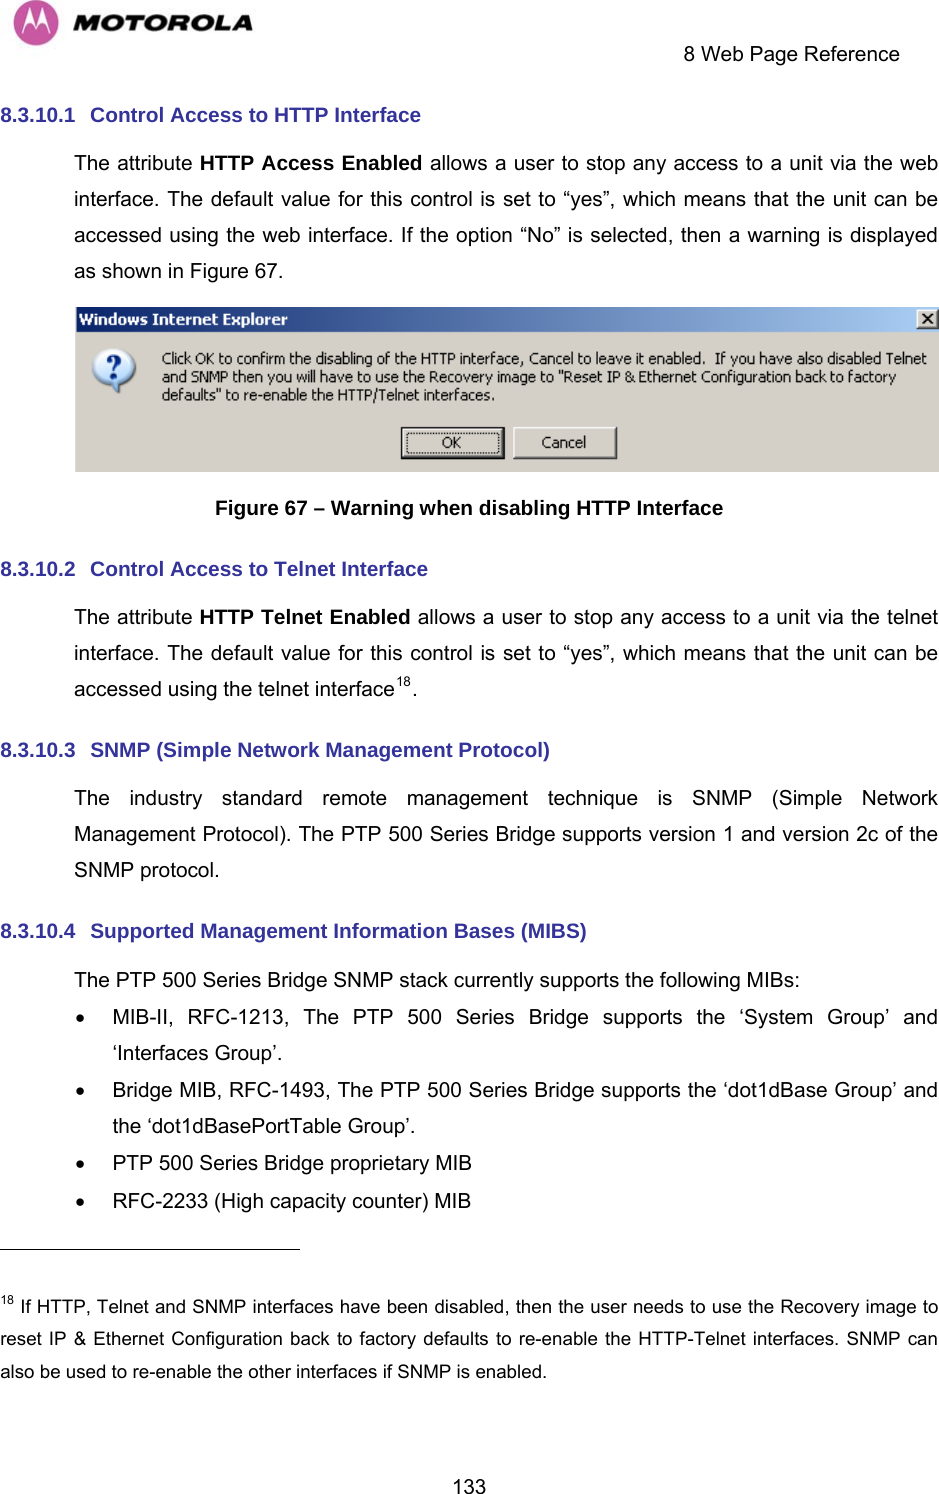     8 Web Page Reference  1338.3.10.1  Control Access to HTTP Interface The attribute HTTP Access Enabled allows a user to stop any access to a unit via the web interface. The default value for this control is set to “yes”, which means that the unit can be accessed using the web interface. If the option “No” is selected, then a warning is displayed as shown in Figure 67.  Figure 67 – Warning when disabling HTTP Interface 8.3.10.2  Control Access to Telnet Interface The attribute HTTP Telnet Enabled allows a user to stop any access to a unit via the telnet interface. The default value for this control is set to “yes”, which means that the unit can be accessed using the telnet interface18. 8.3.10.3  SNMP (Simple Network Management Protocol) The industry standard remote management technique is SNMP (Simple Network Management Protocol). The PTP 500 Series Bridge supports version 1 and version 2c of the SNMP protocol. 8.3.10.4  Supported Management Information Bases (MIBS) The PTP 500 Series Bridge SNMP stack currently supports the following MIBs: •  MIB-II, RFC-1213, The PTP 500 Series Bridge supports the ‘System Group’ and ‘Interfaces Group’. •  Bridge MIB, RFC-1493, The PTP 500 Series Bridge supports the ‘dot1dBase Group’ and the ‘dot1dBasePortTable Group’. •  PTP 500 Series Bridge proprietary MIB •  RFC-2233 (High capacity counter) MIB                                                       18 If HTTP, Telnet and SNMP interfaces have been disabled, then the user needs to use the Recovery image to reset IP &amp; Ethernet Configuration back to factory defaults to re-enable the HTTP-Telnet interfaces. SNMP can also be used to re-enable the other interfaces if SNMP is enabled. 